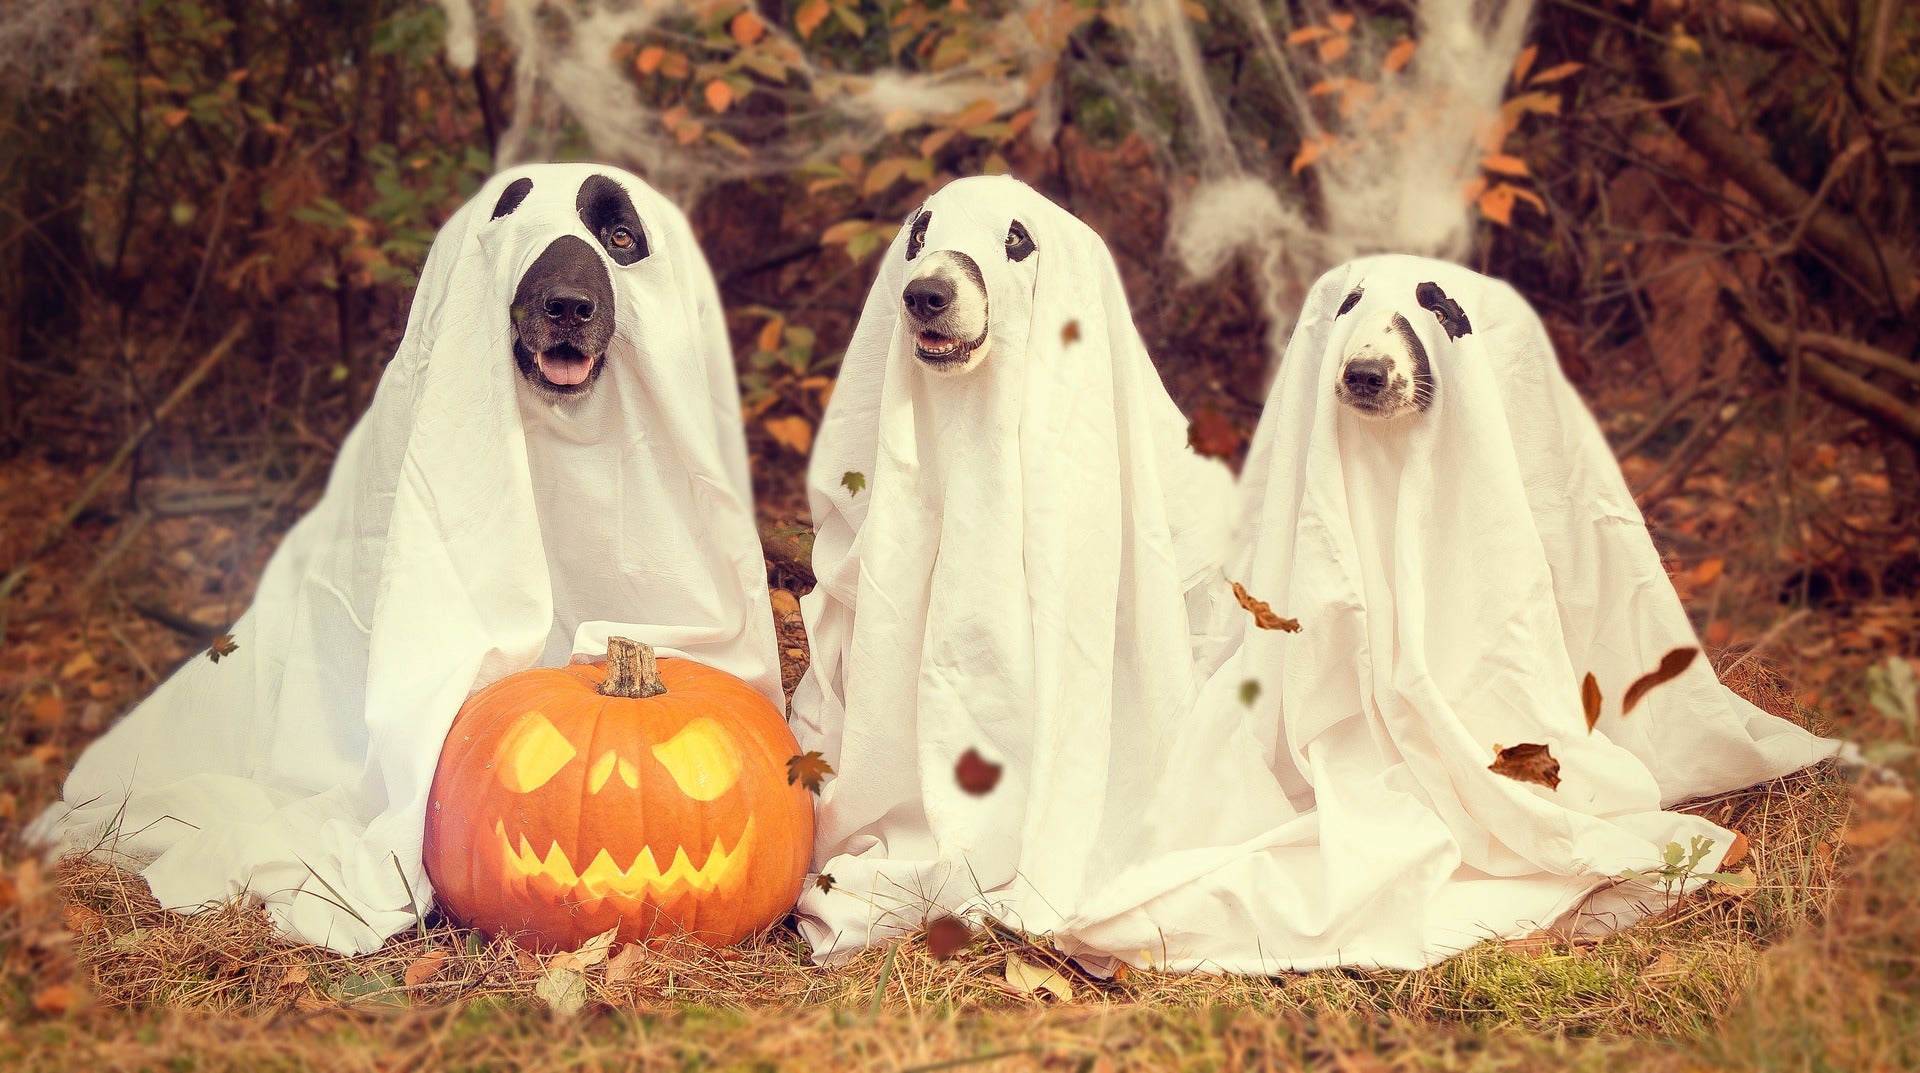 Happy Halloween from this group of dogs